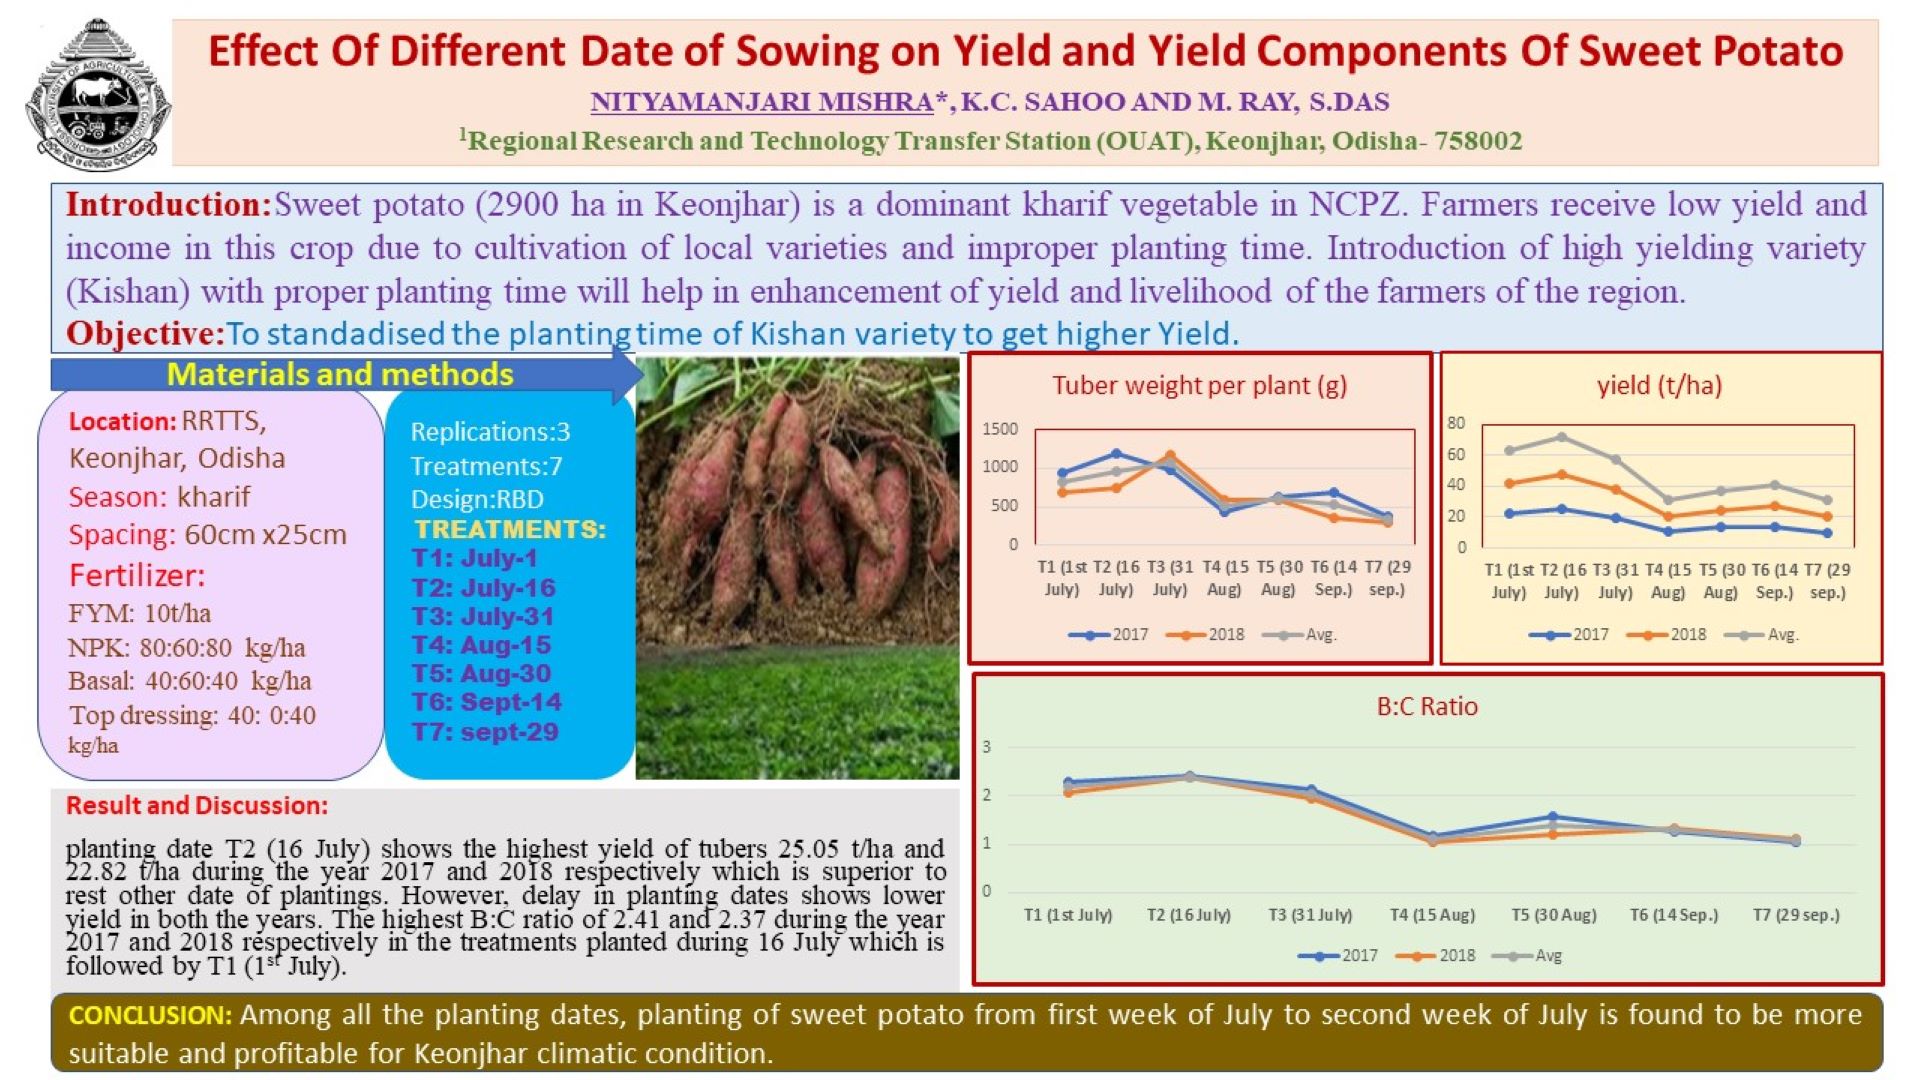 Effect of Different Date of Sowing on Yield and Yield Components of Sweet Potato 